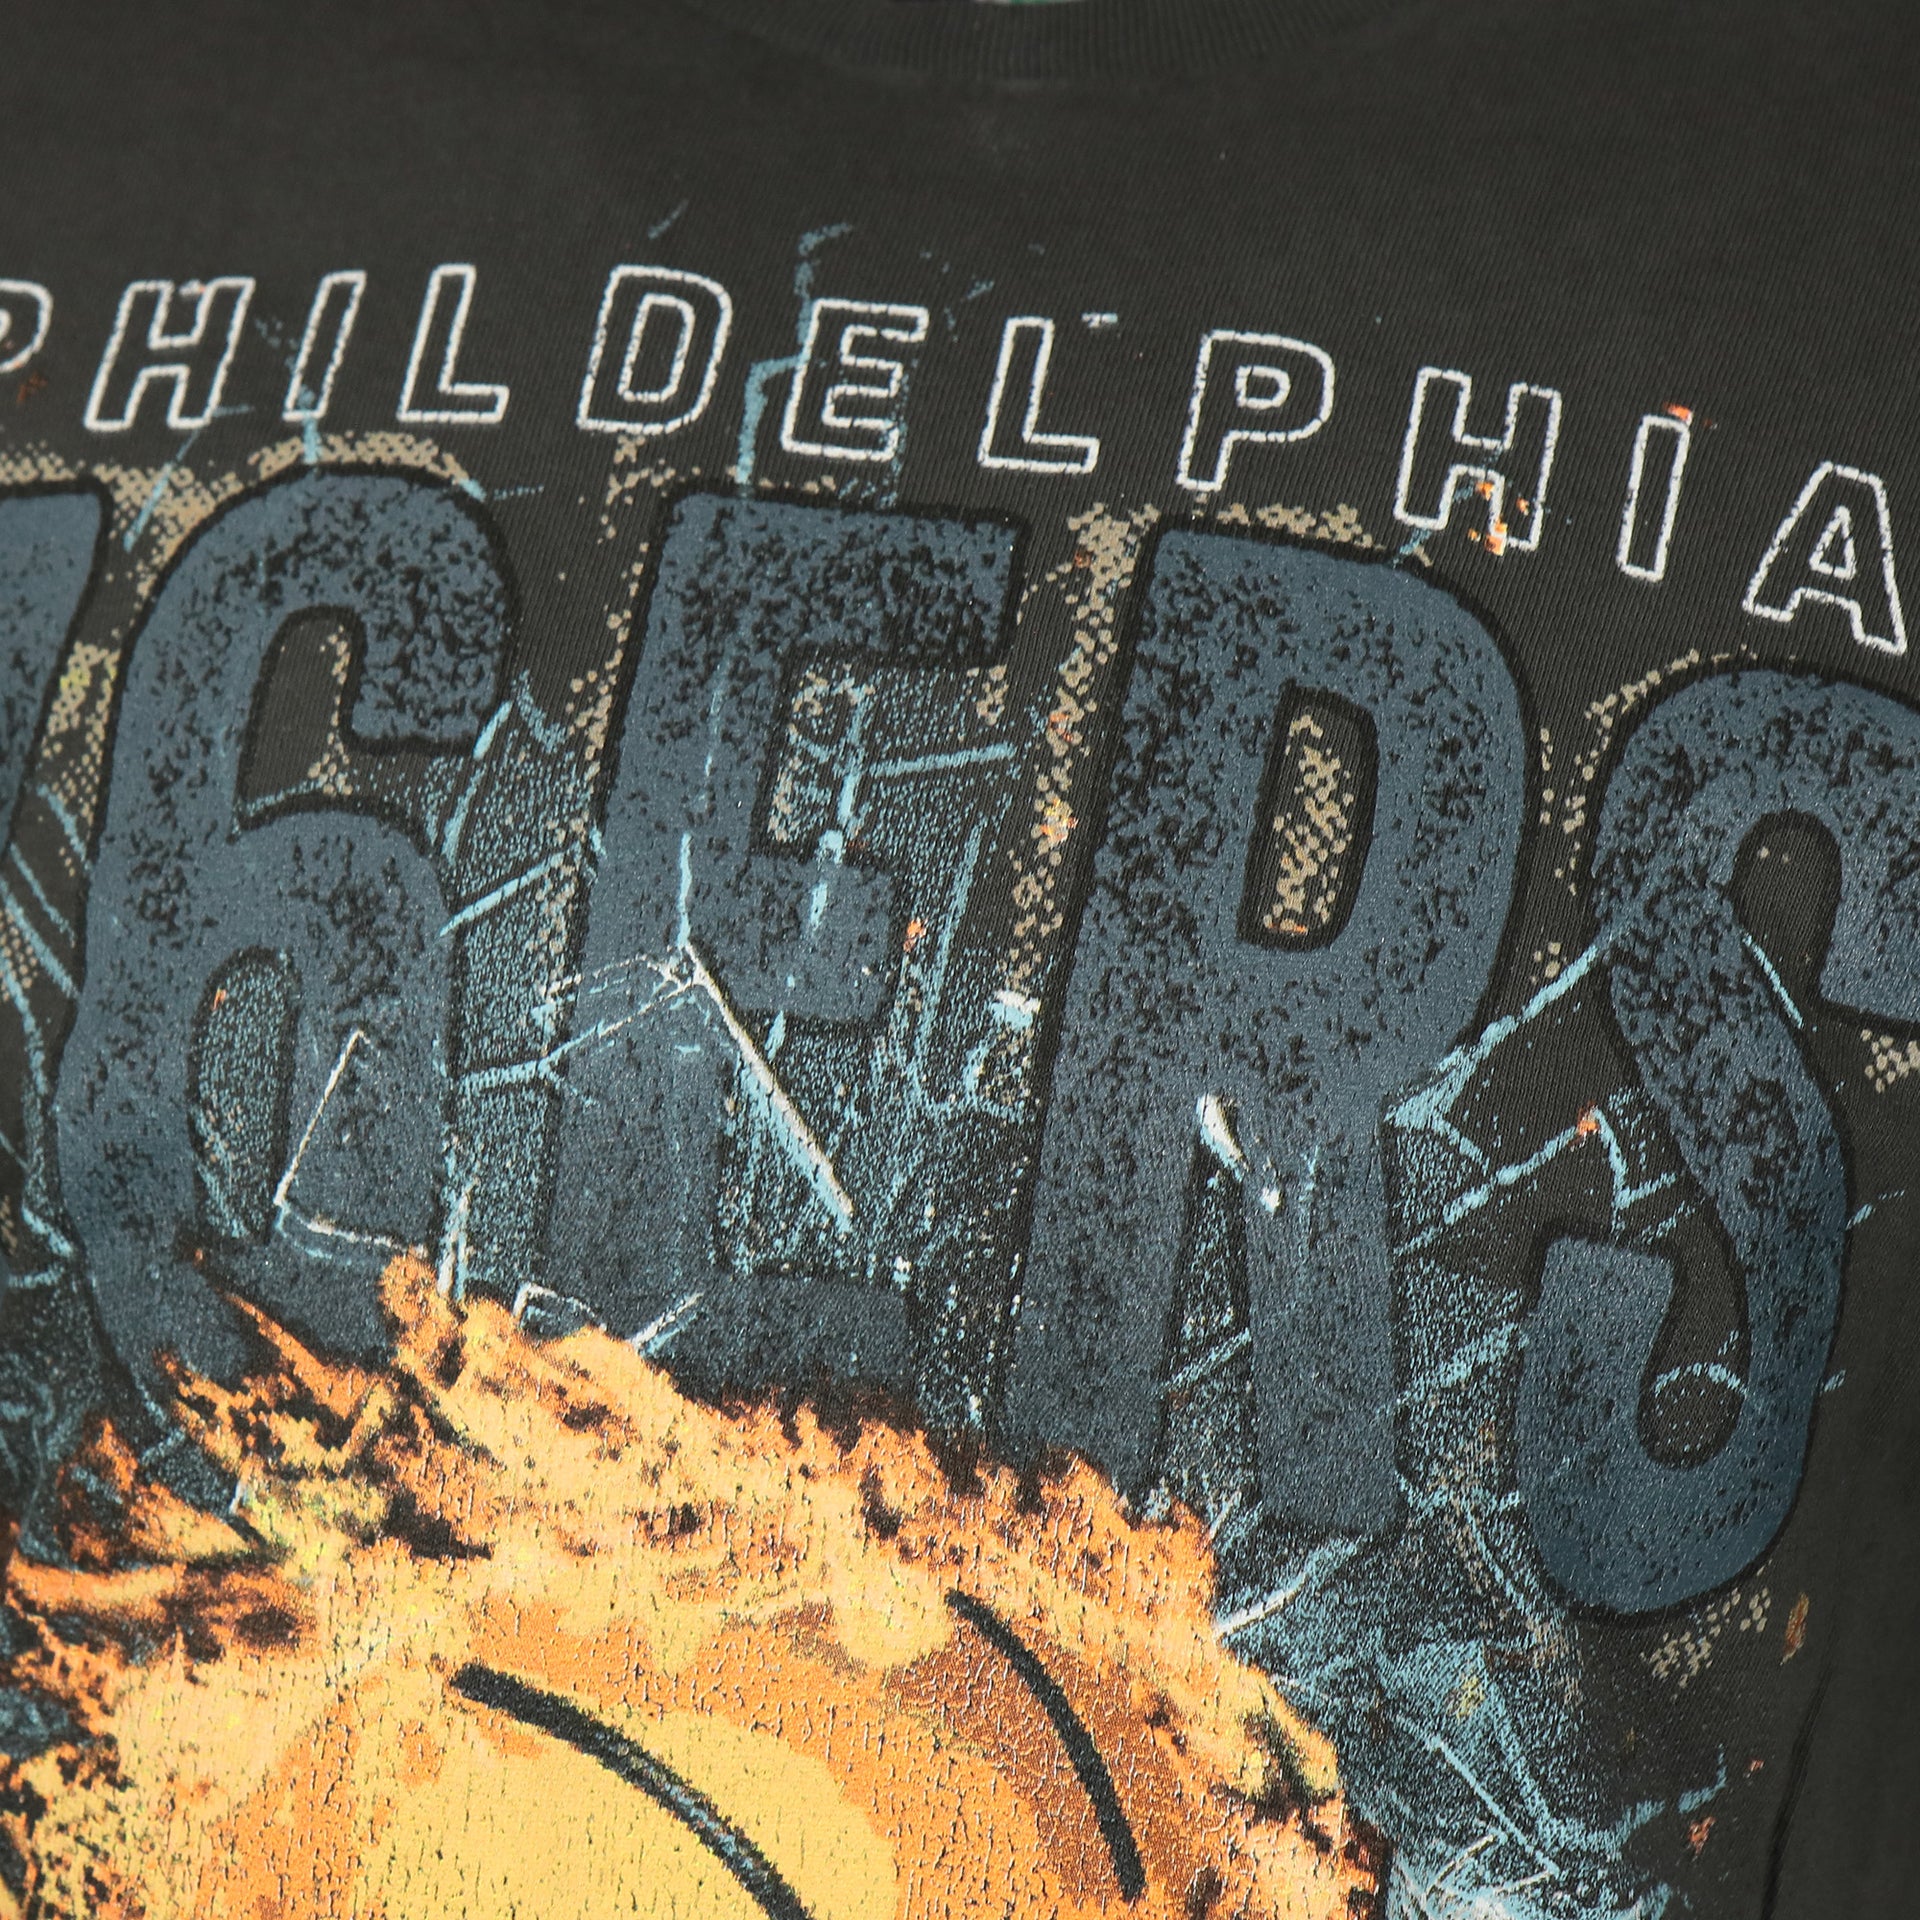 distressed 76ers name on the front of the Philadelphia 76ers Flaming Basketball Shattering Glass Vintage Tubular Distressed T-Shirt | Flint Black